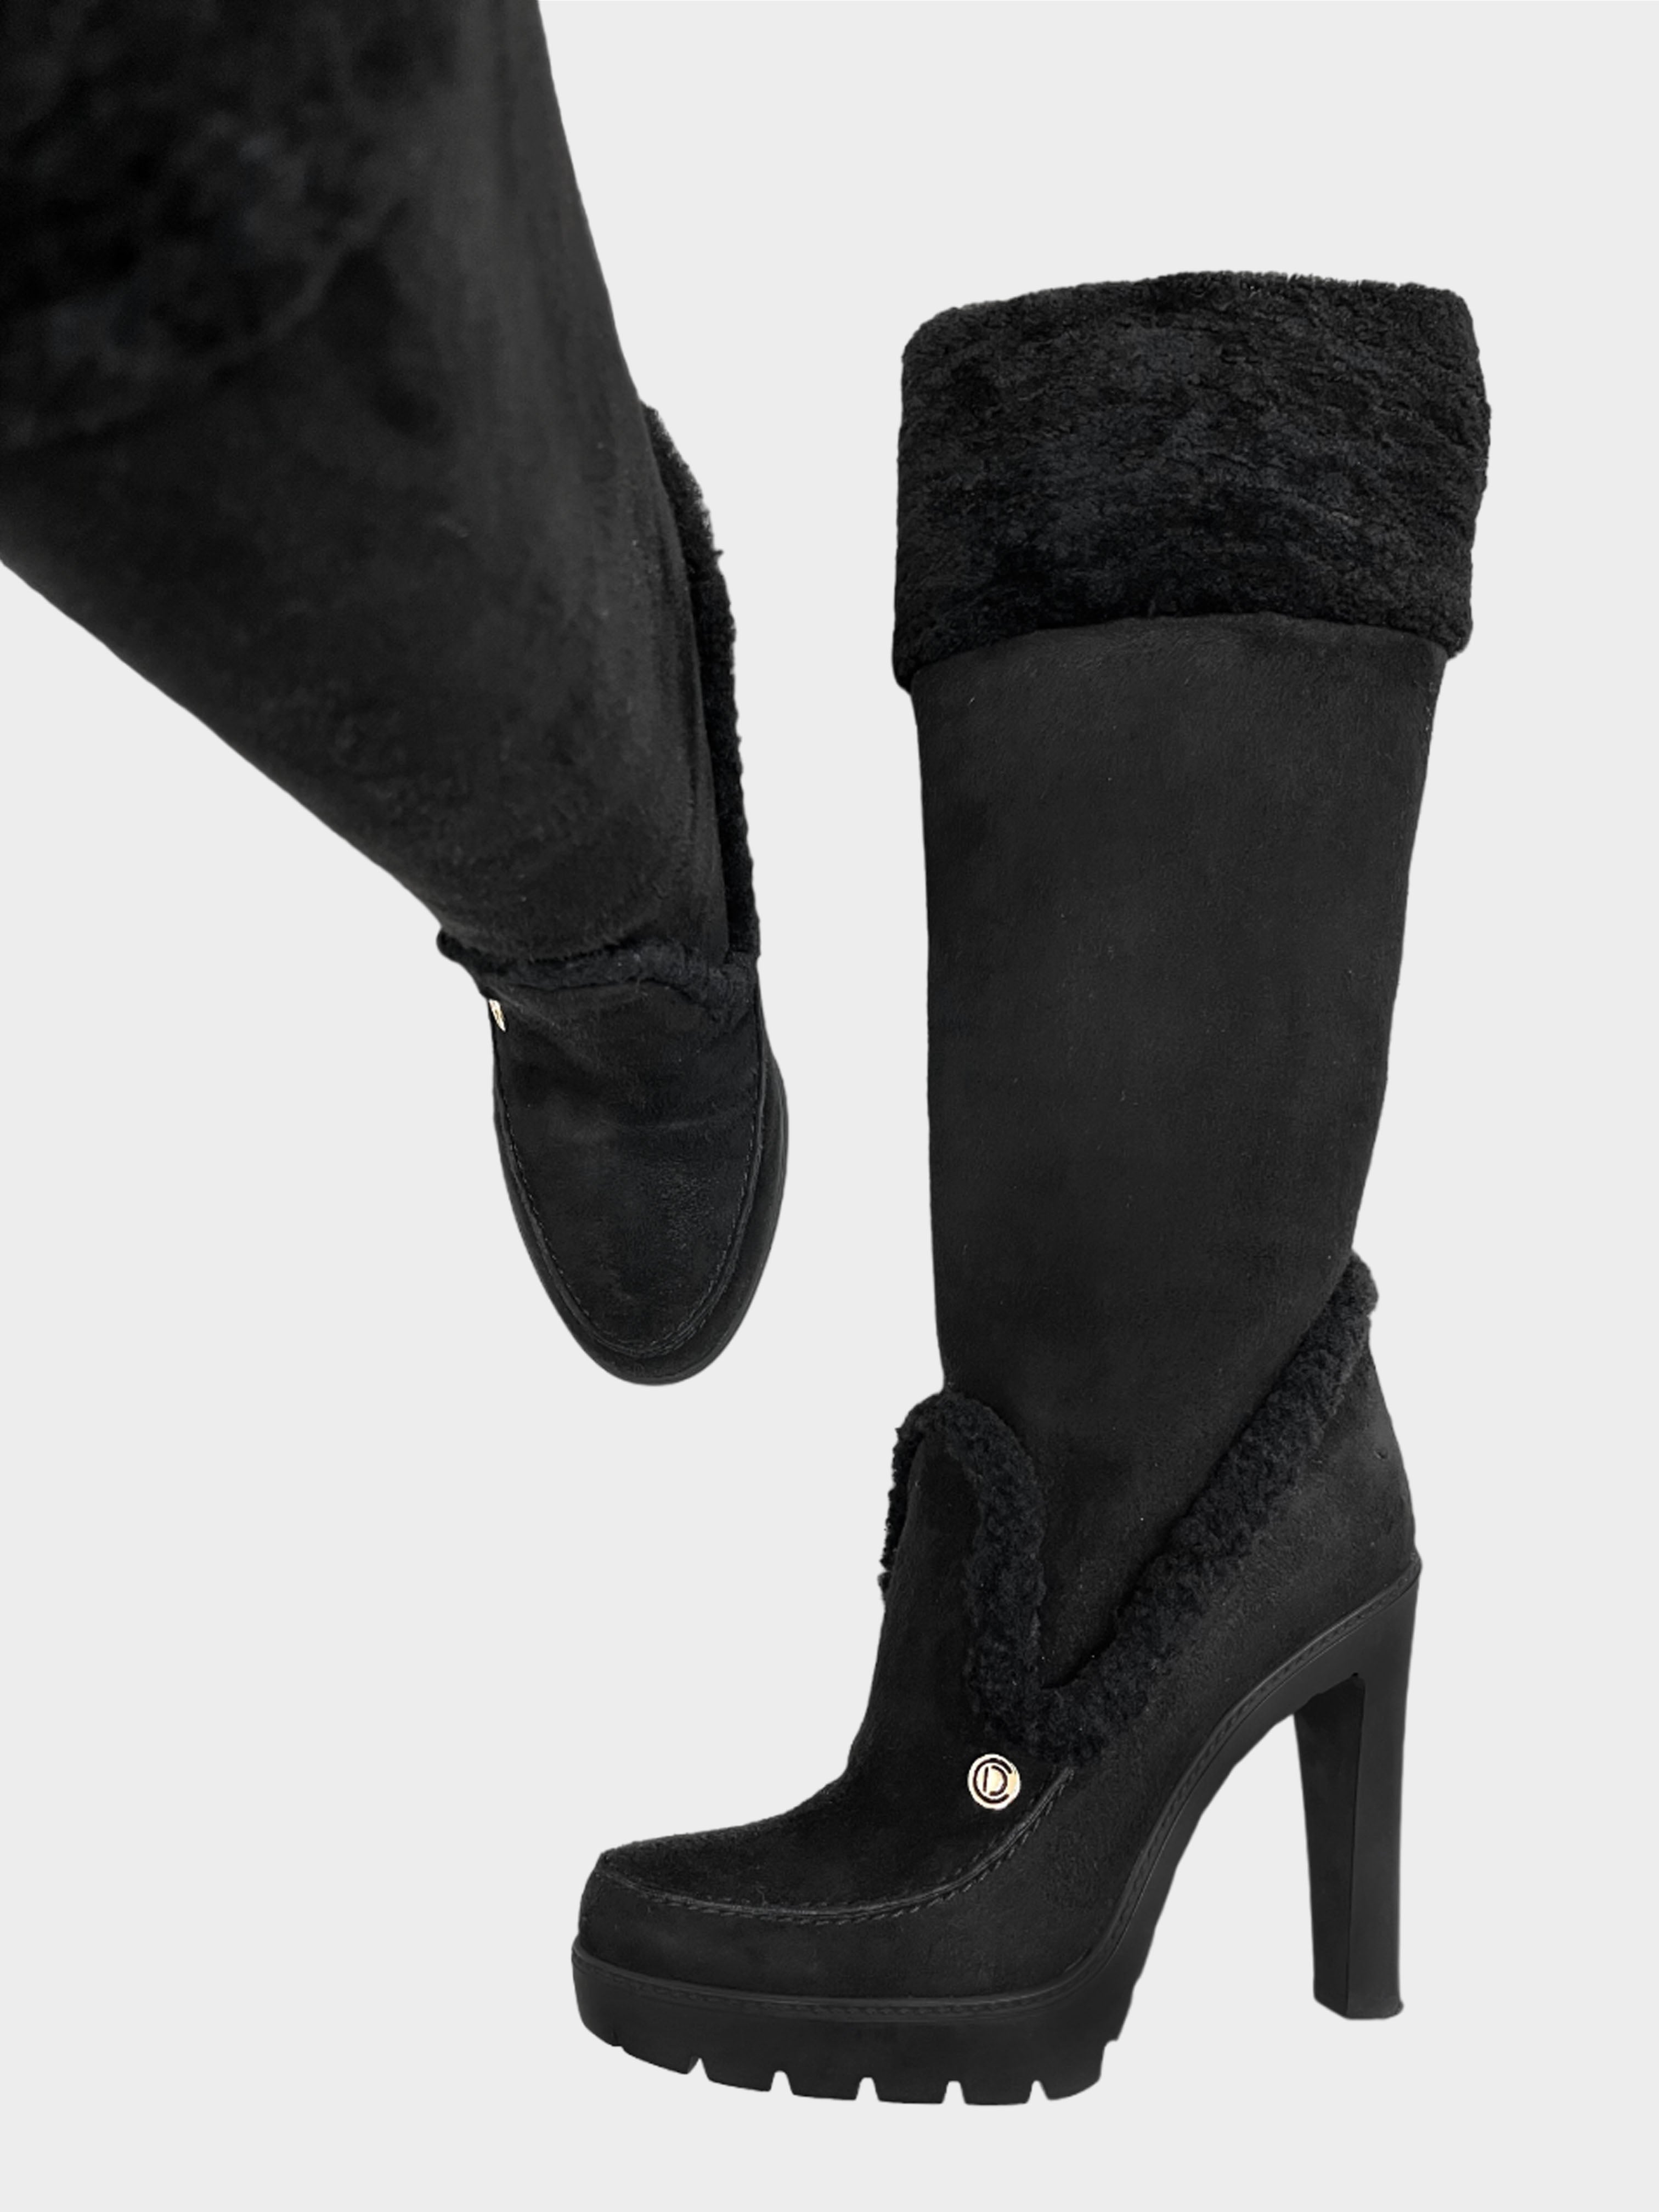 Christian Dior 2010s Black Shearling Boots